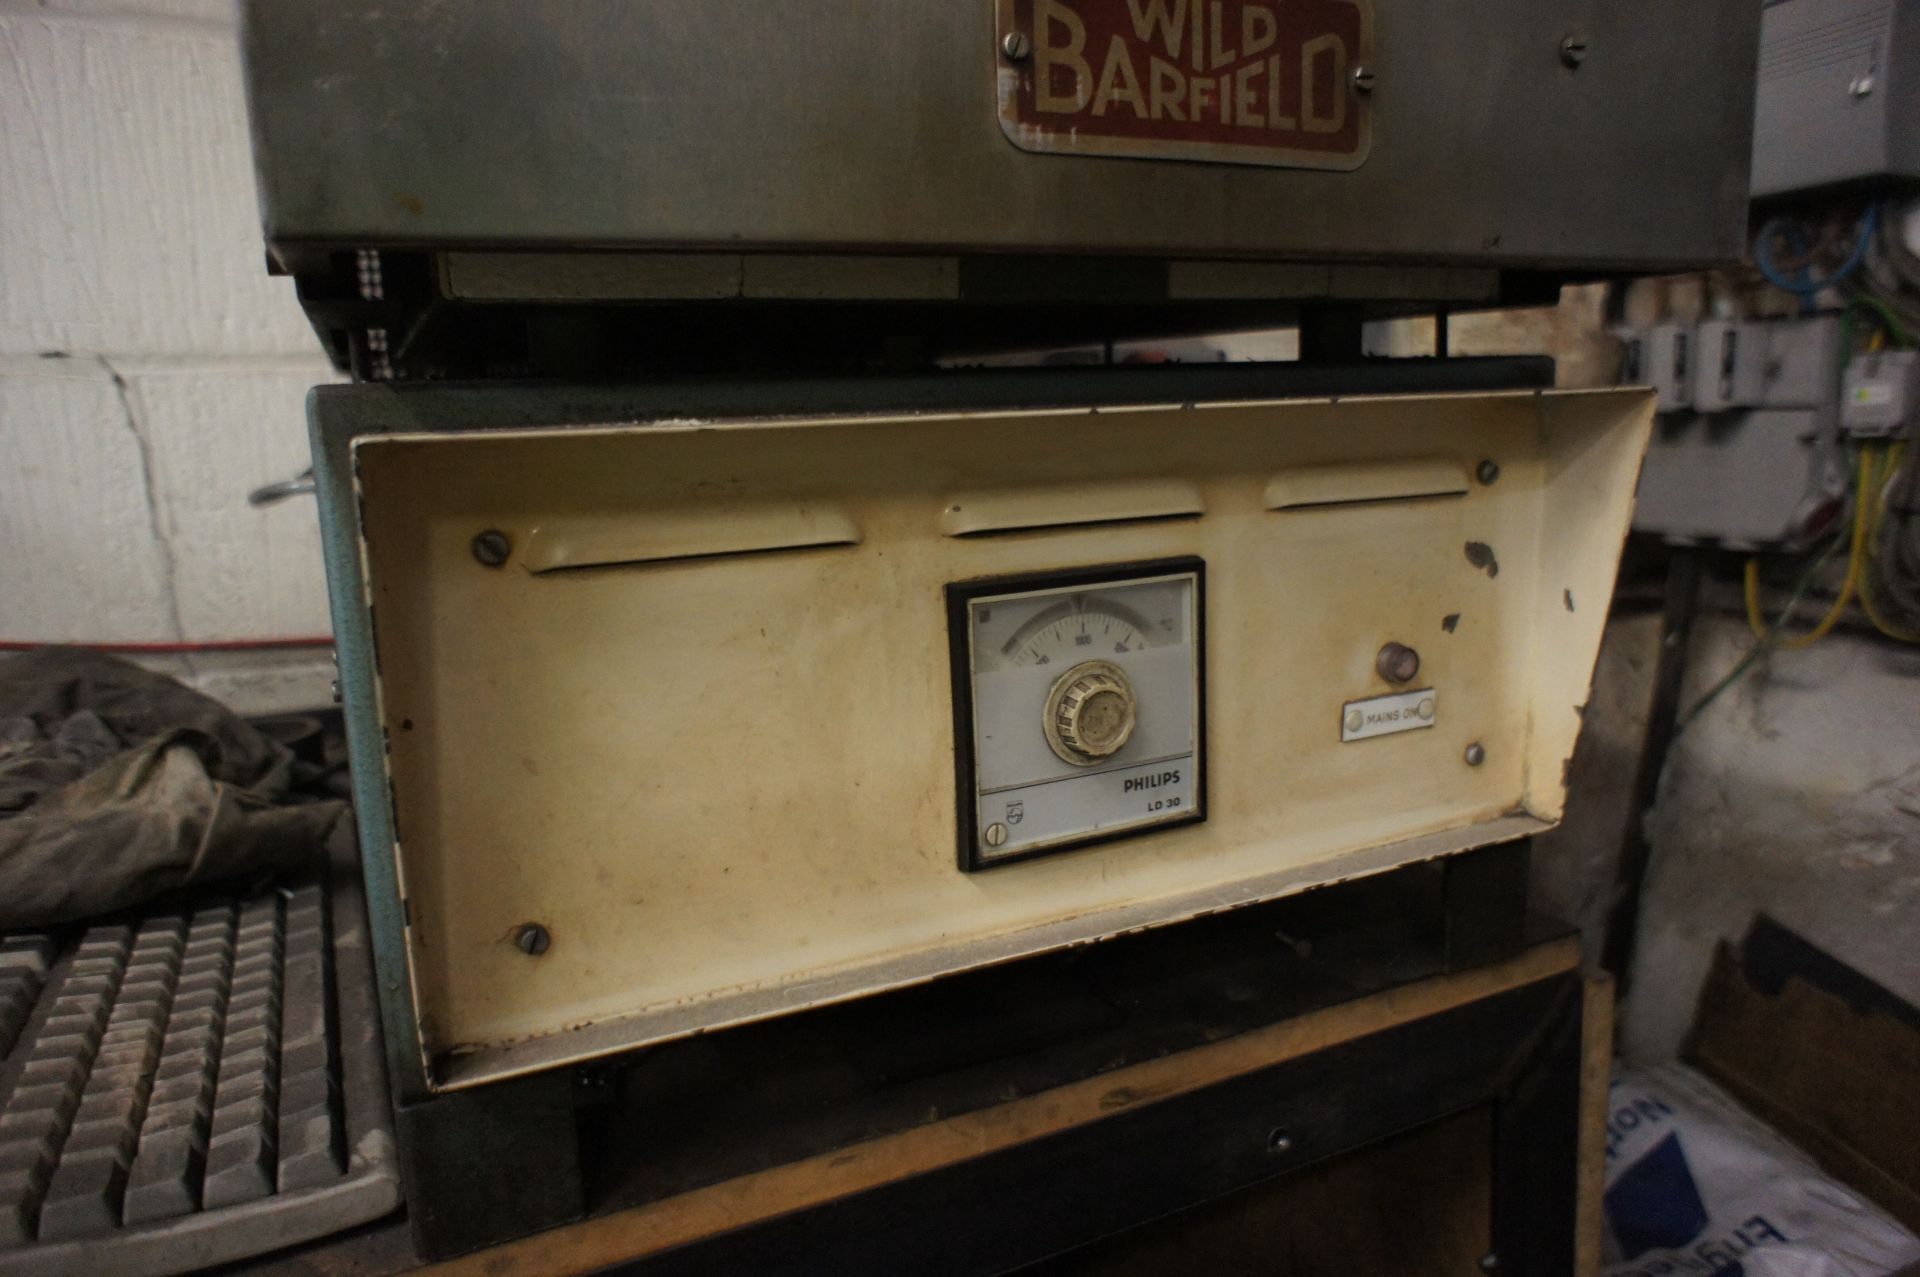 Wild Barfield M1354 Industrial Oven, 240v - Image 2 of 3